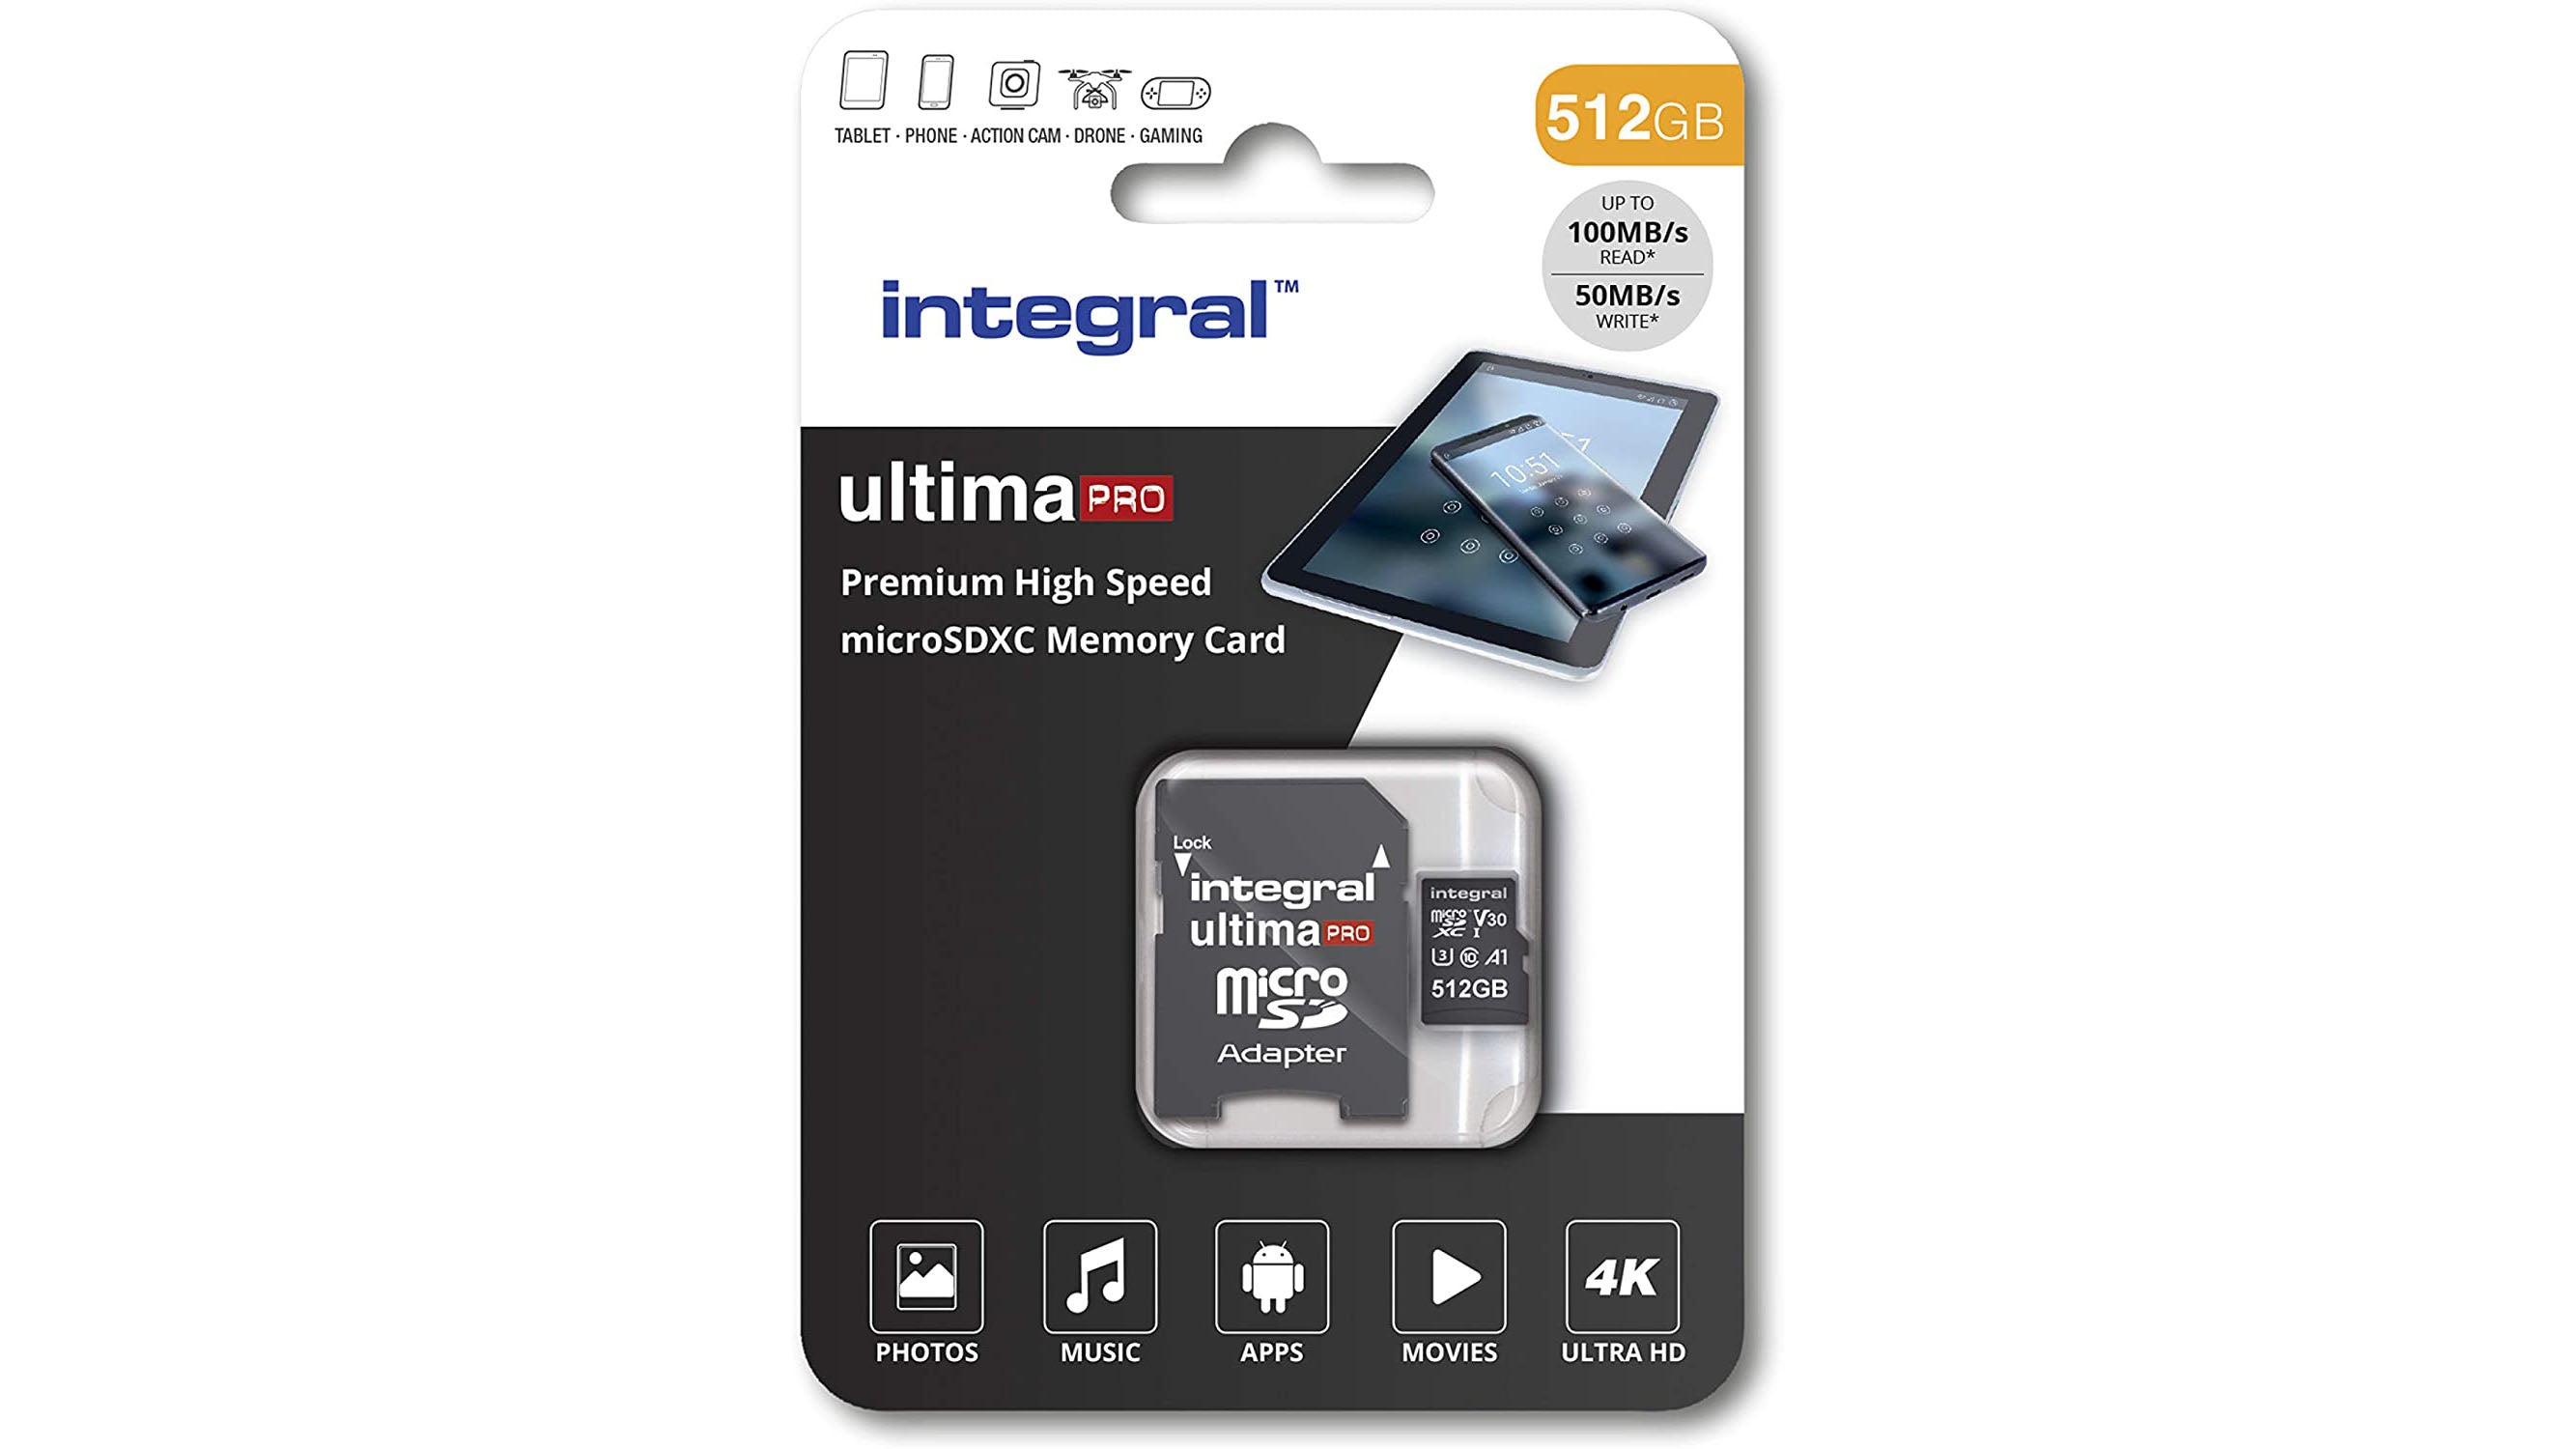 an integral ultima pro micro sd card with 512gb/500gb capacity